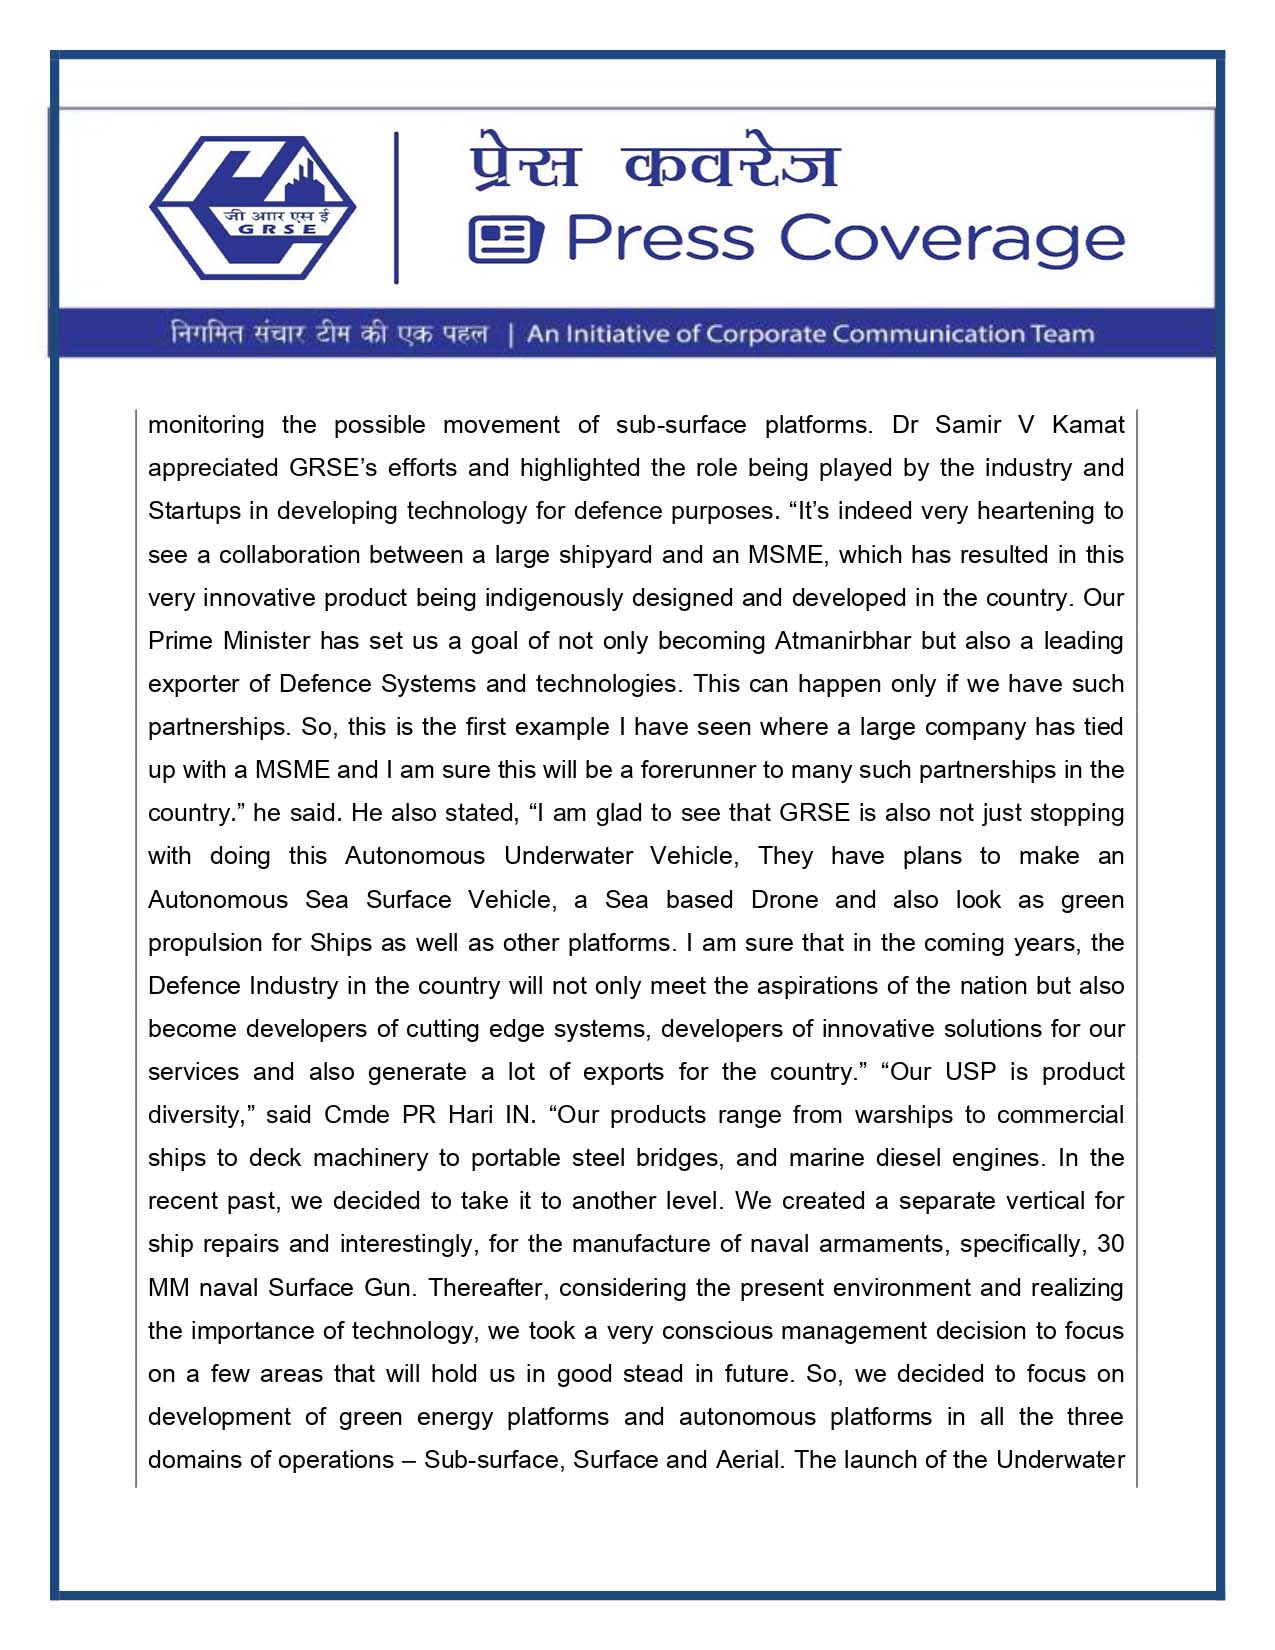 Press Coverage : United News of India, 29 Jul 23 : DRDO Chairman lauds GRSE's initiative on Autonomous Underwater Vehicle